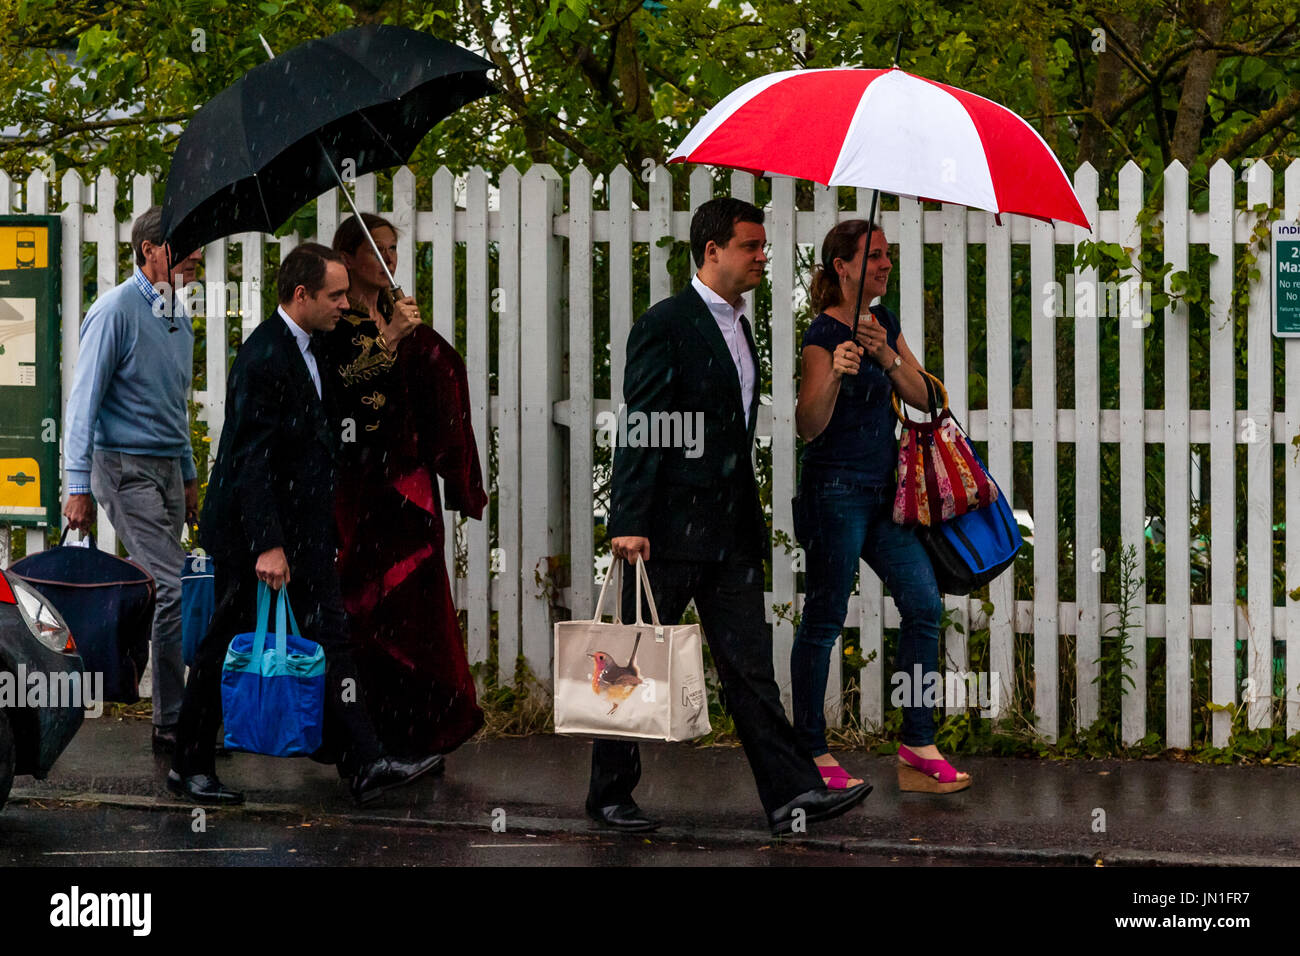 Lewes, UK. 29th July 2017. Opera fans arrive at Lewes train station in the rain en route to Glyndebourne Opera House for a performance of La clemenza di Tito, Lewes, East Sussex, UK.  Credit: Grant Rooney/Alamy Live News Stock Photo